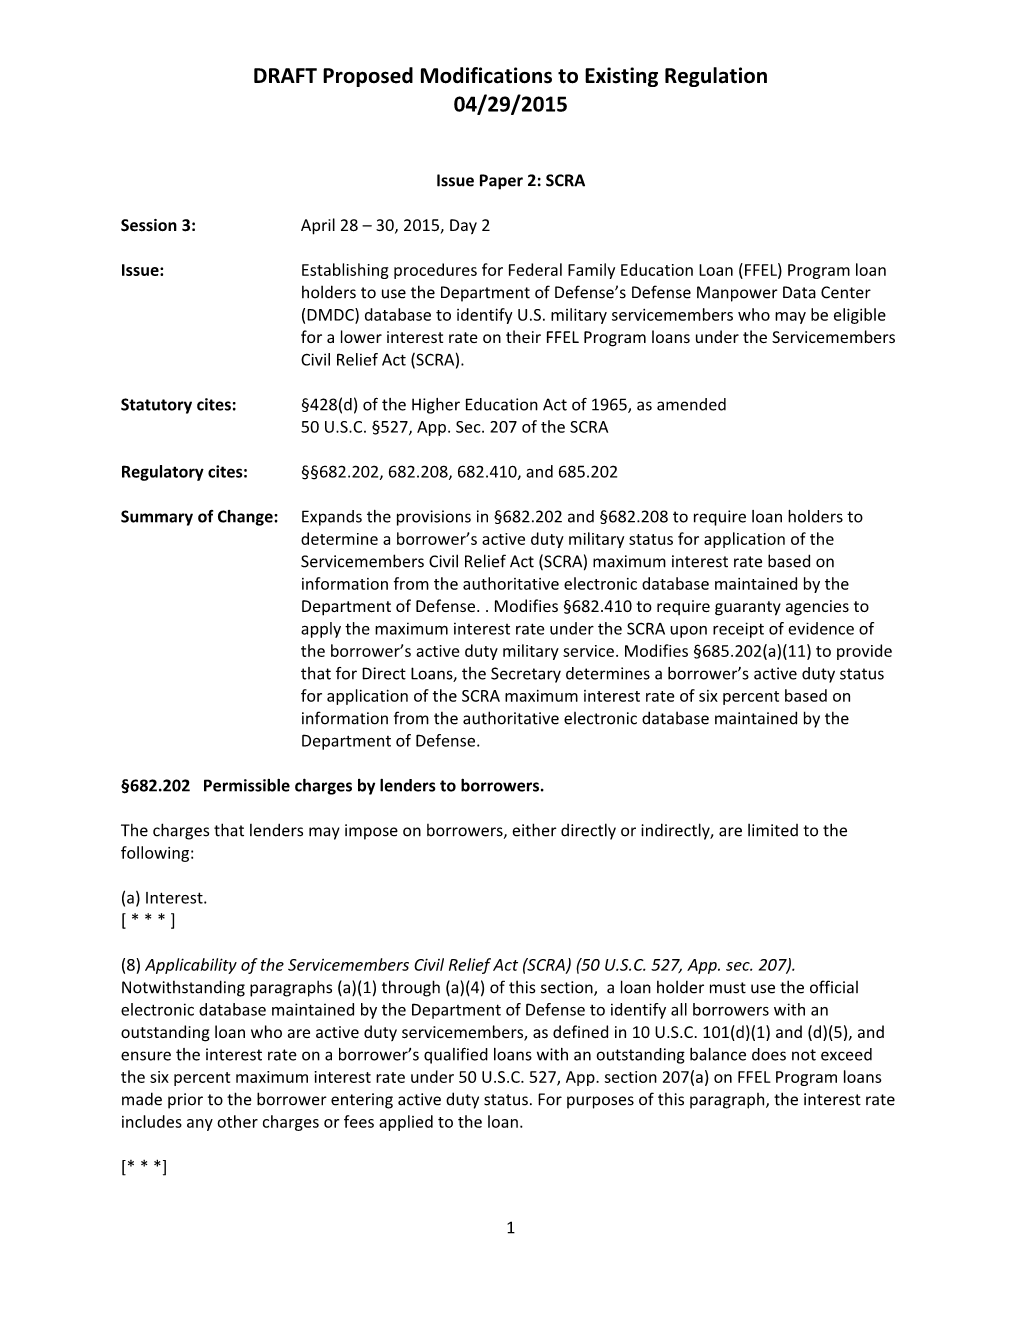 Negotiated Rulemaking for Higher Education 2015: PAYE Session 3, Issue 2: SCRA (MS Word)